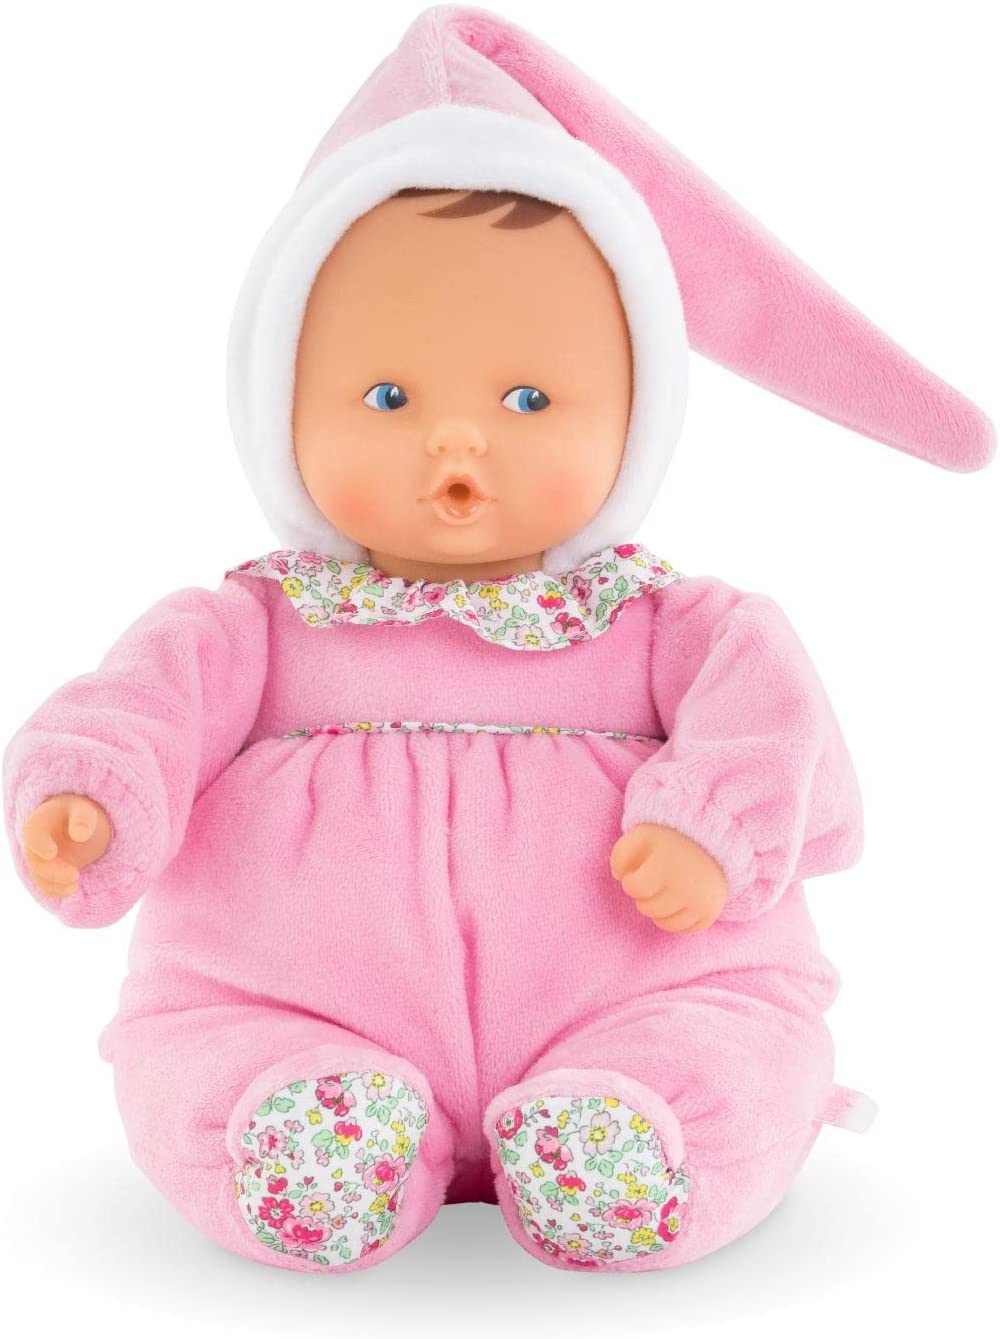 Corolle Babipouce Blossom Garden Soft-Body Baby Doll, Pink,11"